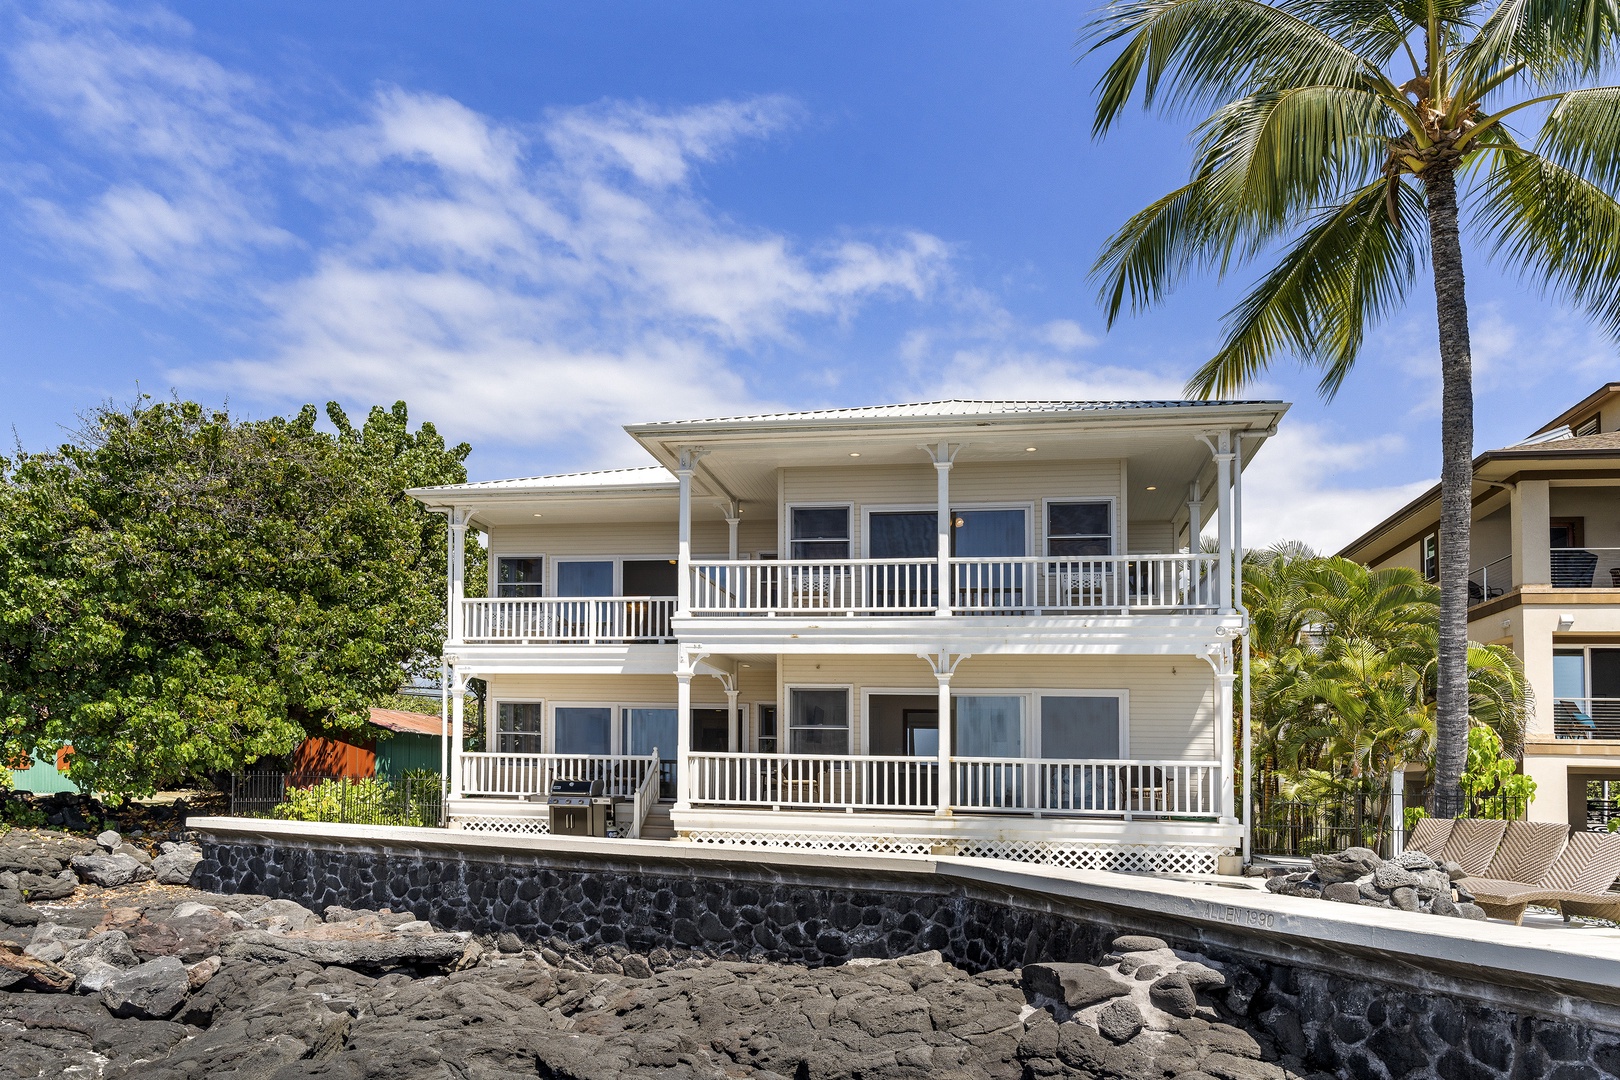 Kailua Kona Vacation Rentals, Dolphin Manor - There’s no shortage of rooms with a view inside this nearly 3700 sqft home, and the backyard pool and spa provide sought after outdoor space from which to enjoy the island breezes and ample sunshine that makes Kailua-Kona a popular destination